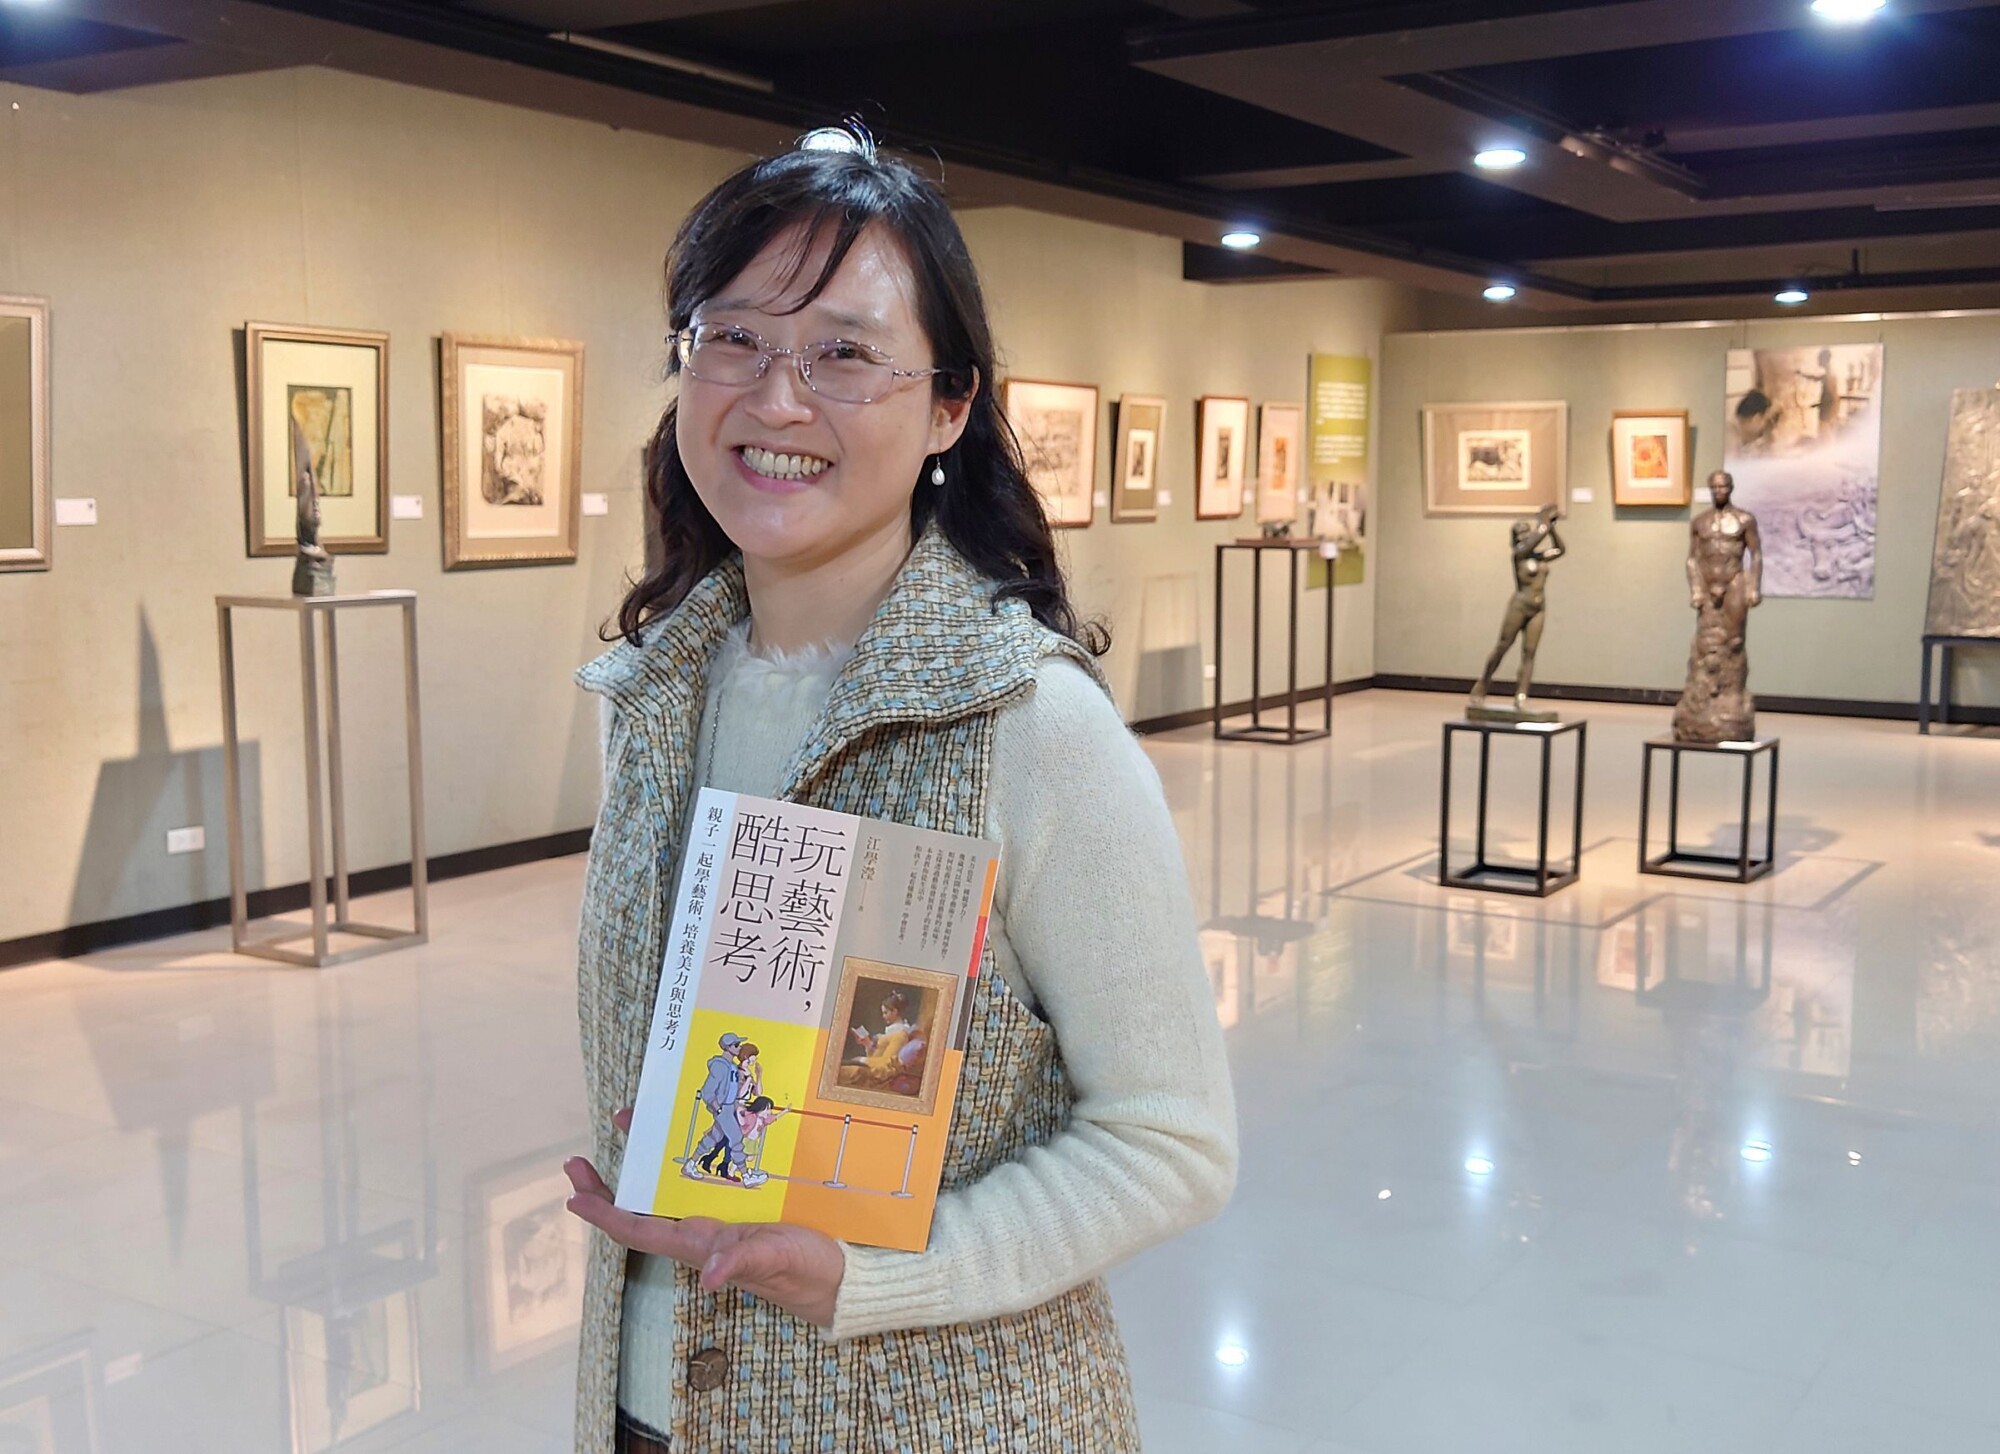 China Market Turns Frosty for Taiwan Books, as Tensions Rise